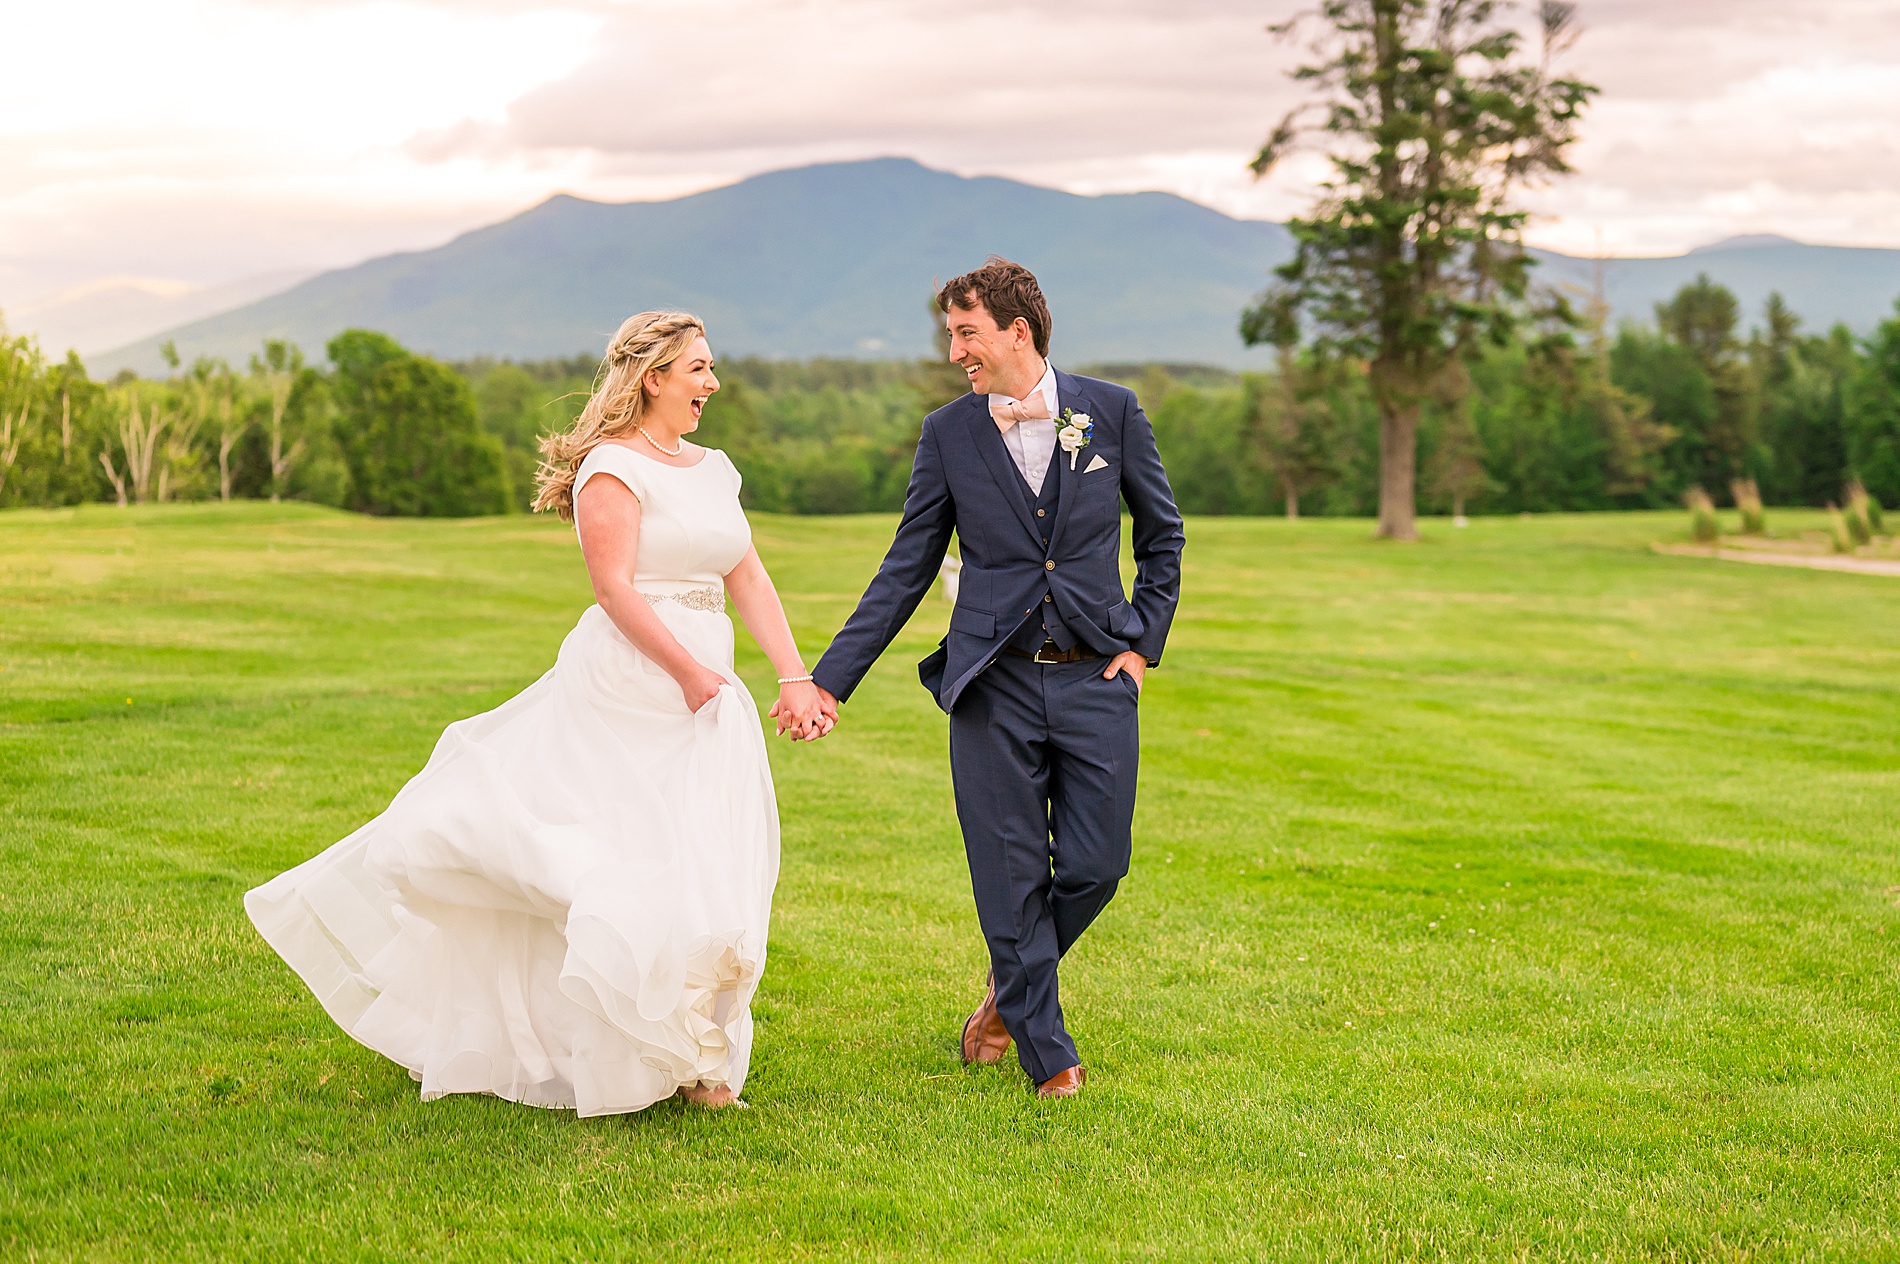 Mountain View Grand Wedding in Whitefield, NH